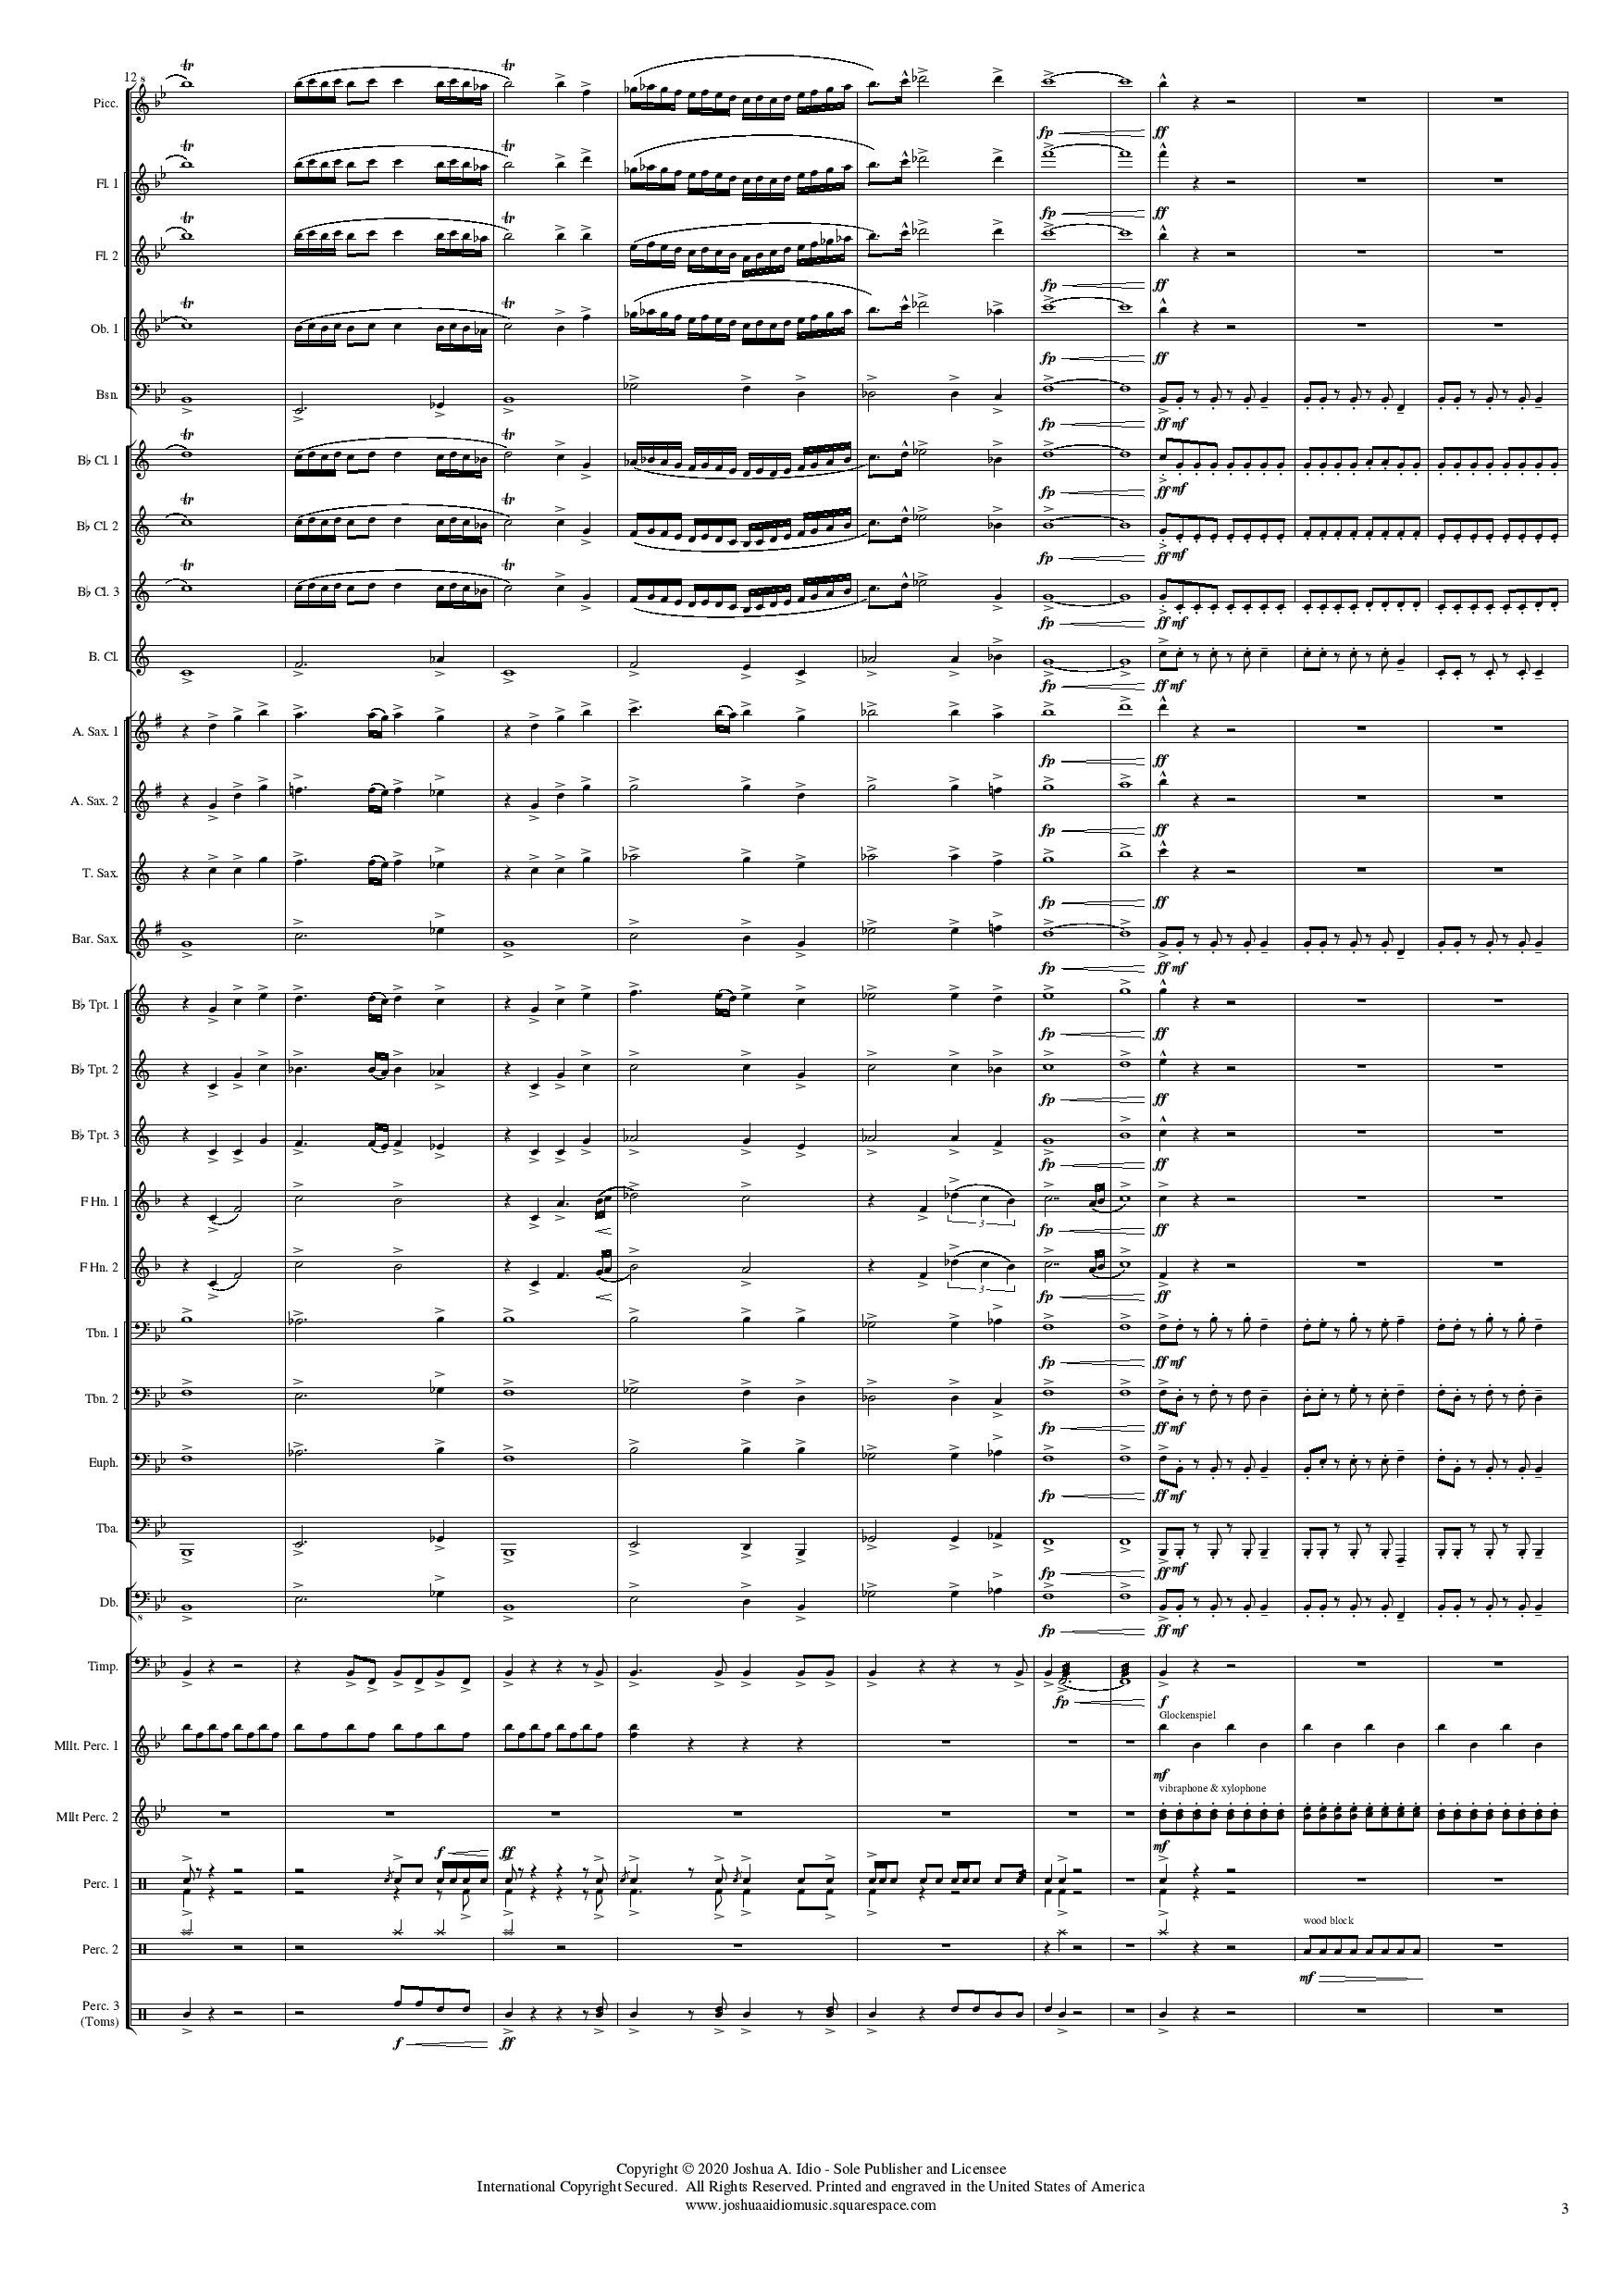 Overture For Education - FULL BOOK-page-006.jpg